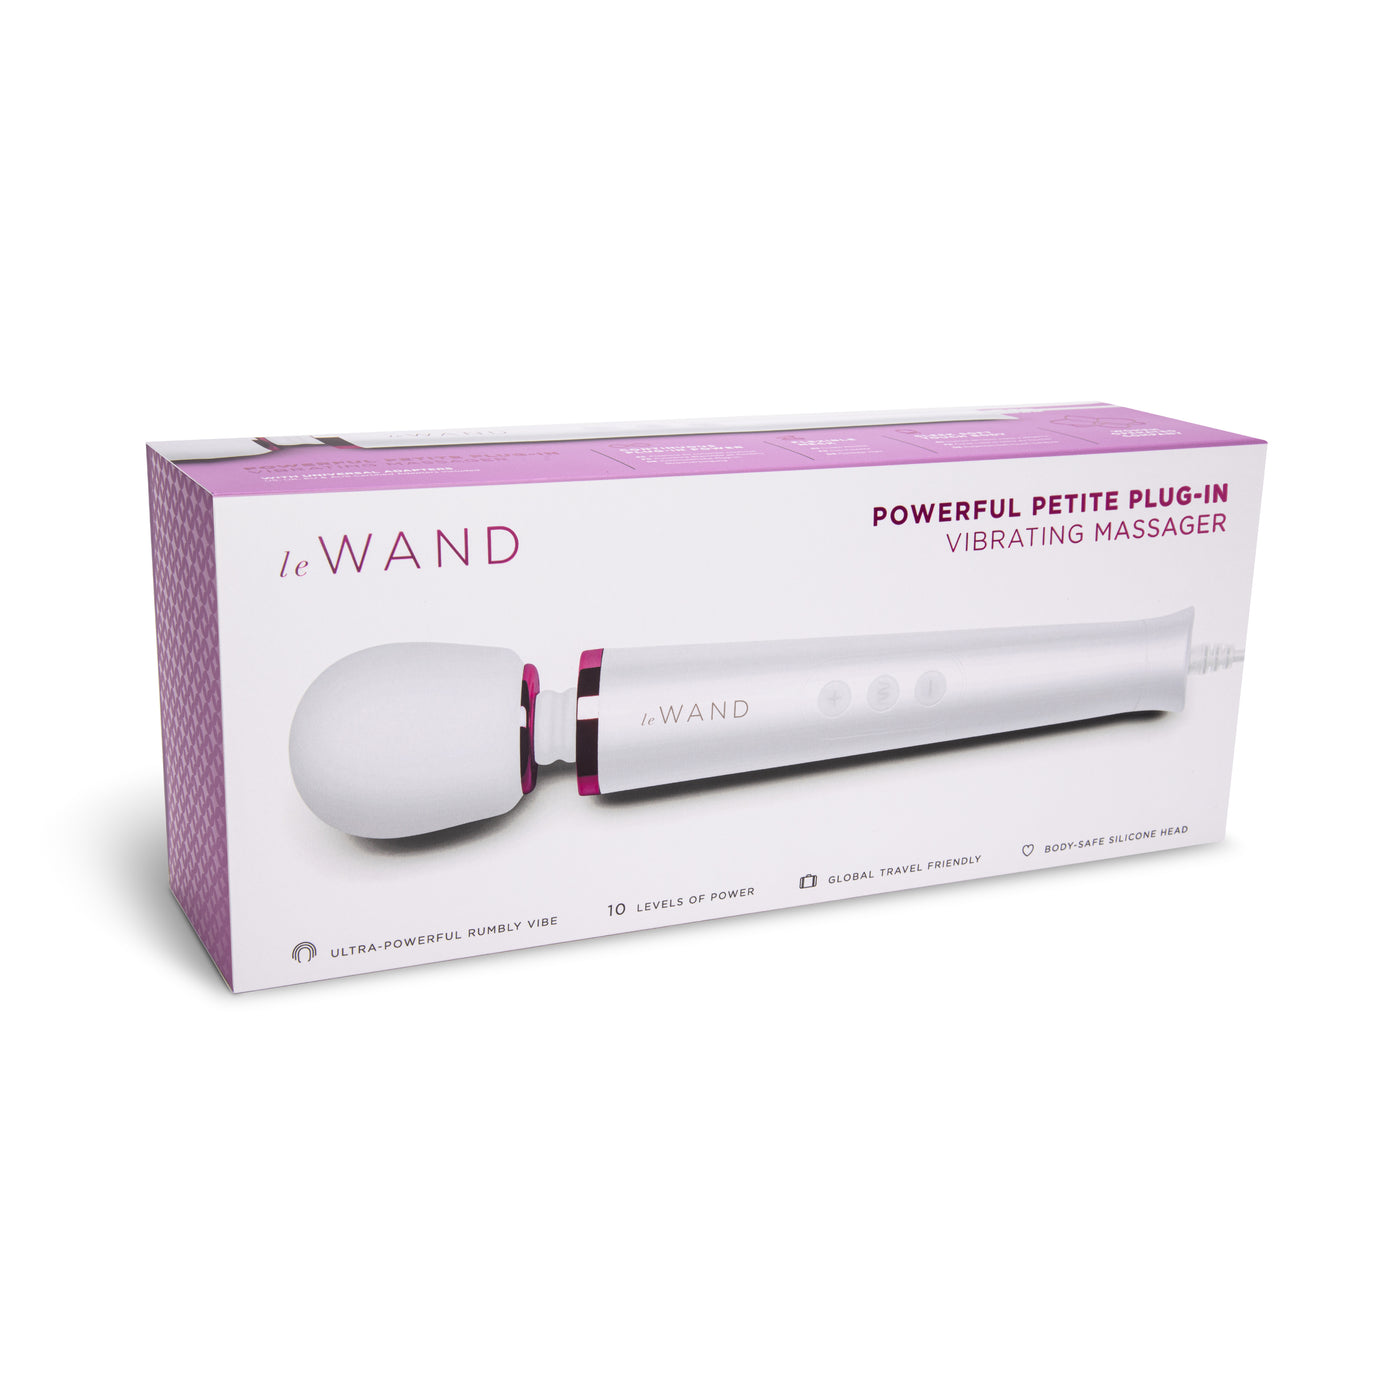 Le Wand Powerful Petite Plug-In- White